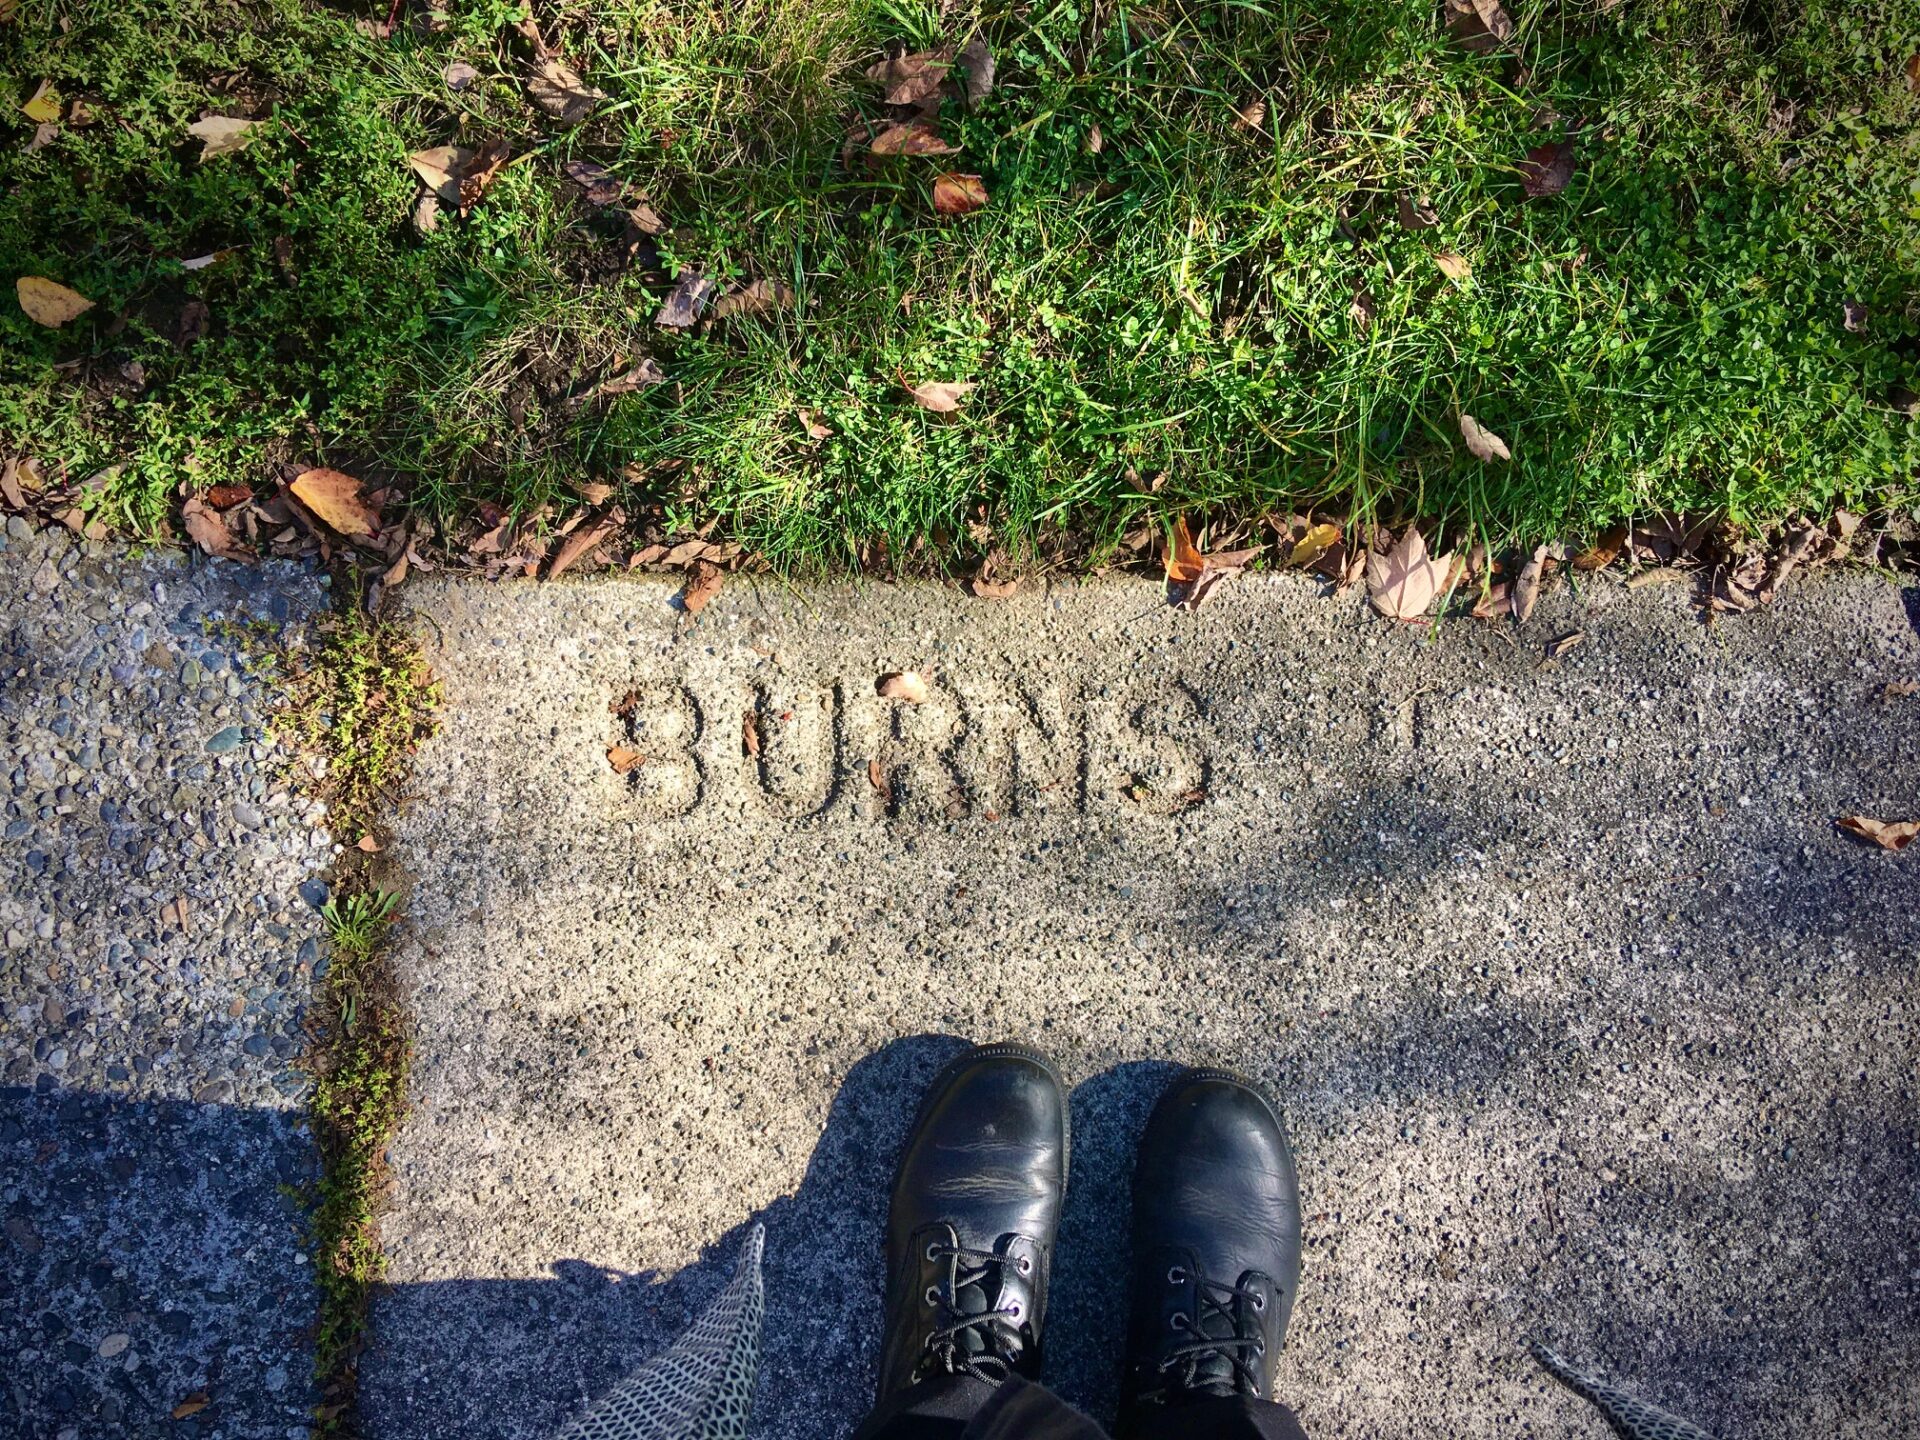 Summer walking tours with VHF - Secrets of mount Pleasant - photo of "Burns" engraved on a walkway.